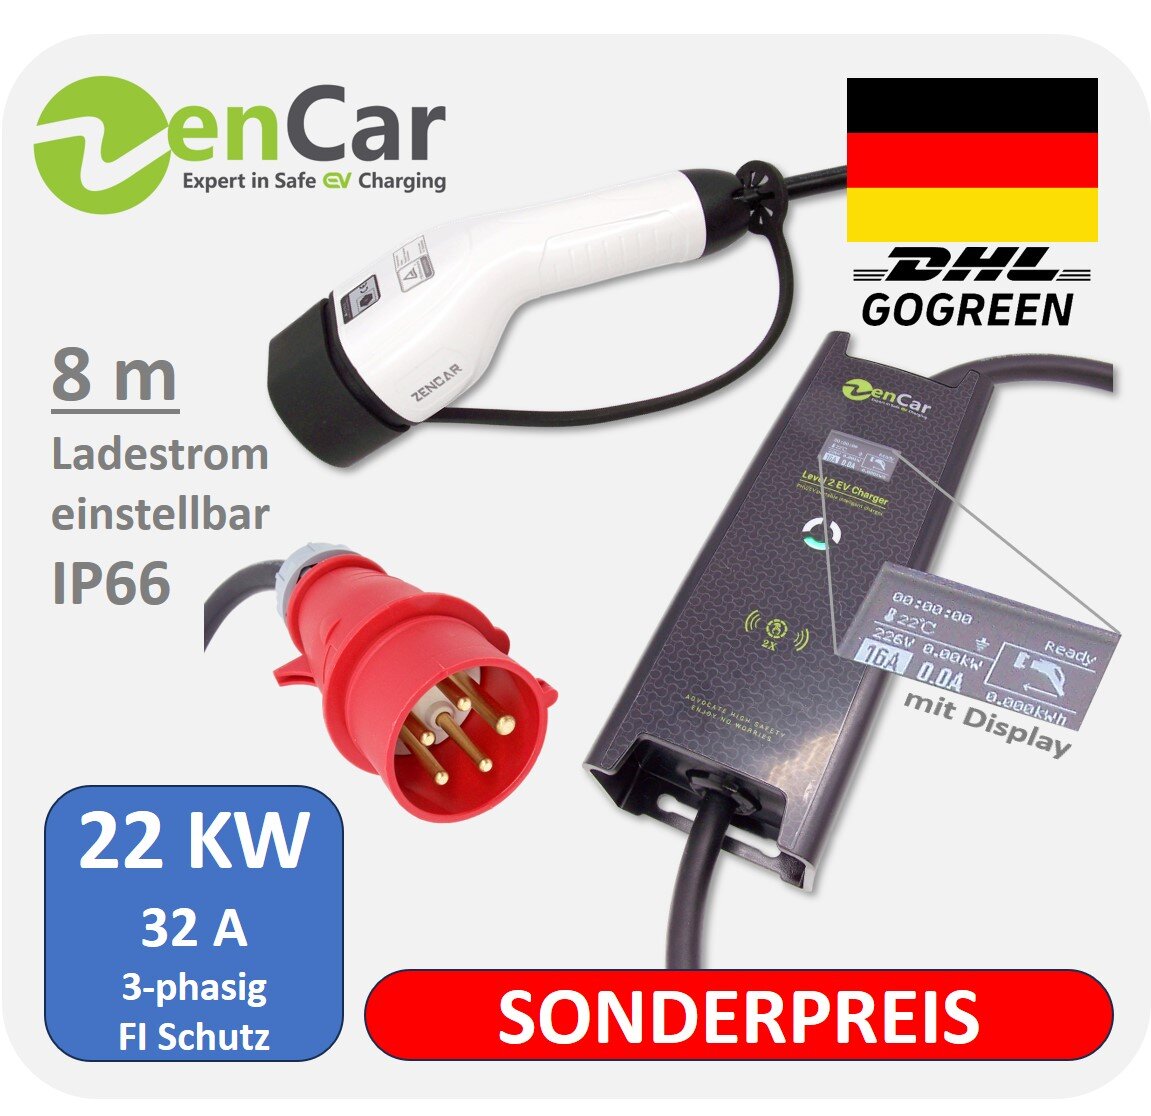 BE-PCD050/ Mobiles 32A 3-Phasen AC E-Auto Ladegerät mit 6-fach Adapte,  878,22 €